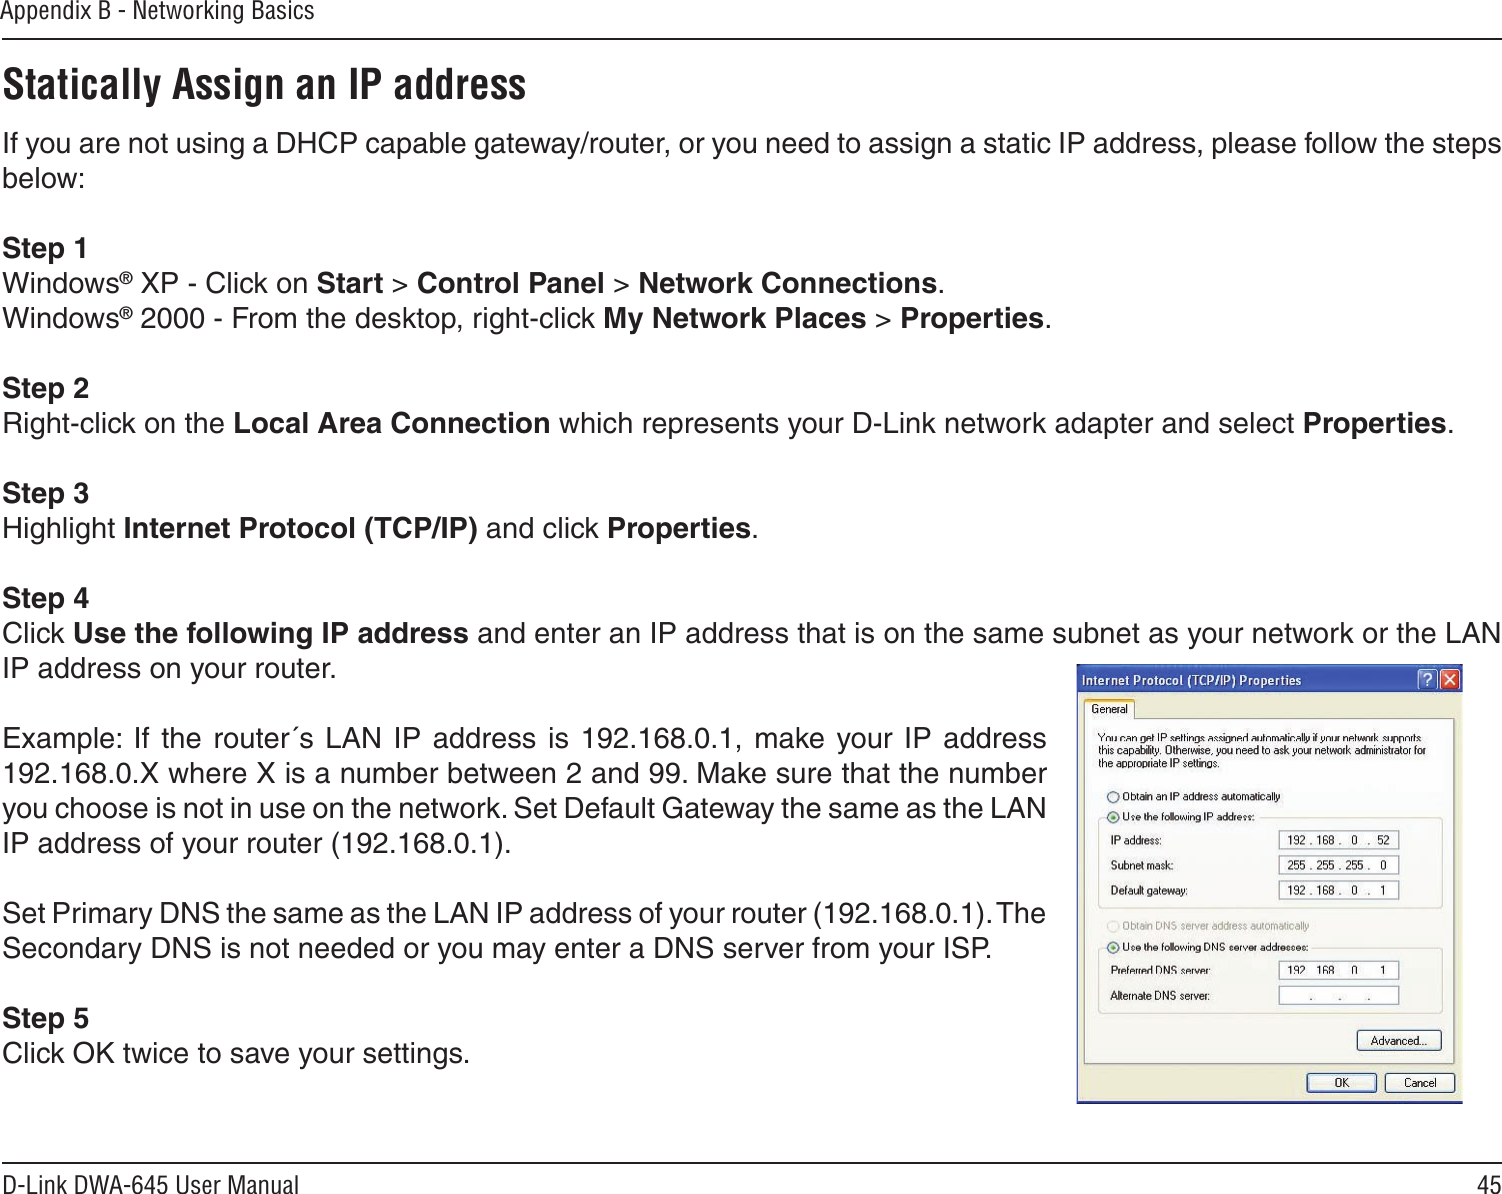 45D-Link DWA-645 User ManualAppendix B - Networking BasicsStatically Assign an IP addressIf you are not using a DHCP capable gateway/router, or you need to assign a static IP address, please follow the steps below:Step 1Windows® XP - Click on Start &gt; Control Panel &gt; Network Connections.Windows® 2000 - From the desktop, right-click My Network Places &gt; Properties.Step 2Right-click on the Local Area Connection which represents your D-Link network adapter and select Properties.Step 3Highlight Internet Protocol (TCP/IP) and click Properties.Step 4Click Use the following IP address and enter an IP address that is on the same subnet as your network or the LAN IP address on your router. Example:  If  the  router´s LAN IP address is 192.168.0.1,  make your IP address 192.168.0.X where X is a number between 2 and 99. Make sure that the number you choose is not in use on the network. Set Default Gateway the same as the LAN IP address of your router (192.168.0.1). Set Primary DNS the same as the LAN IP address of your router (192.168.0.1). The Secondary DNS is not needed or you may enter a DNS server from your ISP.Step 5Click OK twice to save your settings.